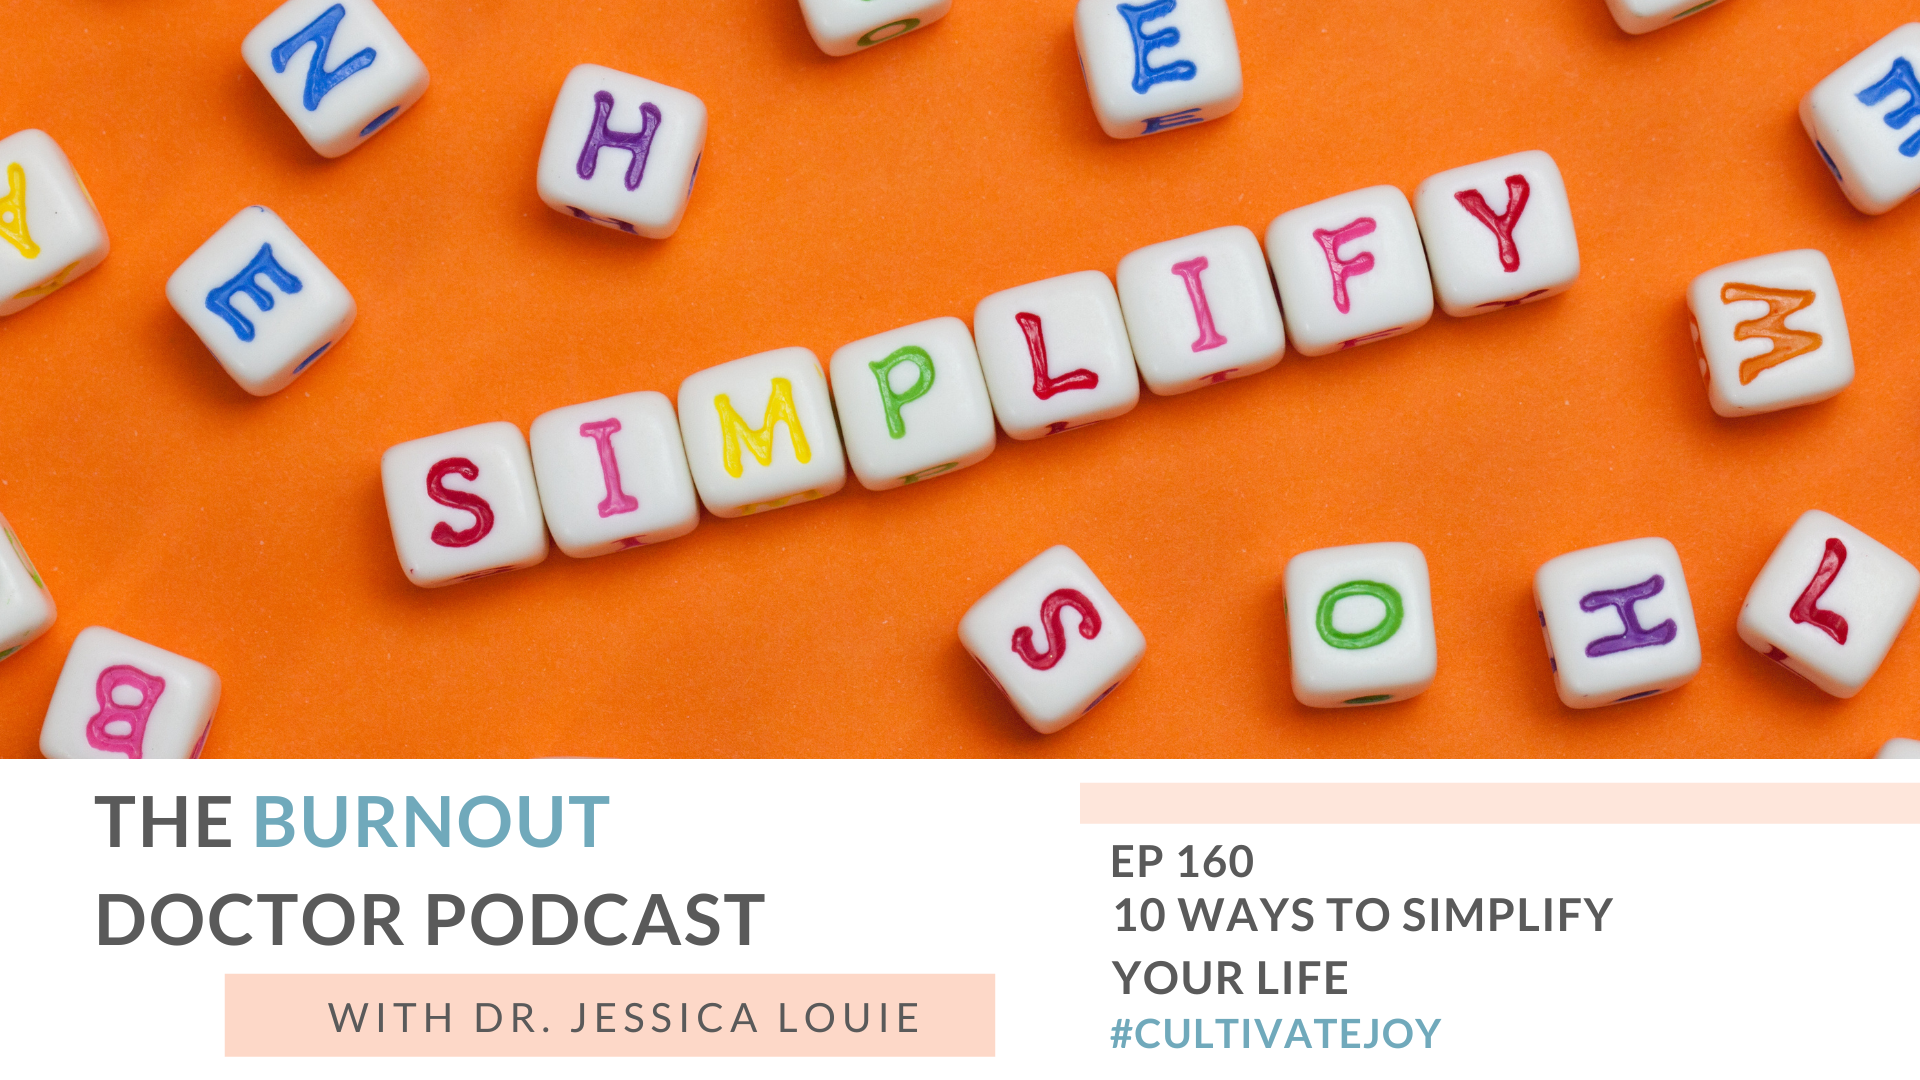 10 Ways to simplify your life today. KonMari Method. Simplify and declutter to help with burnout. Healthcare burnout. Stress. Coach. Speaker.